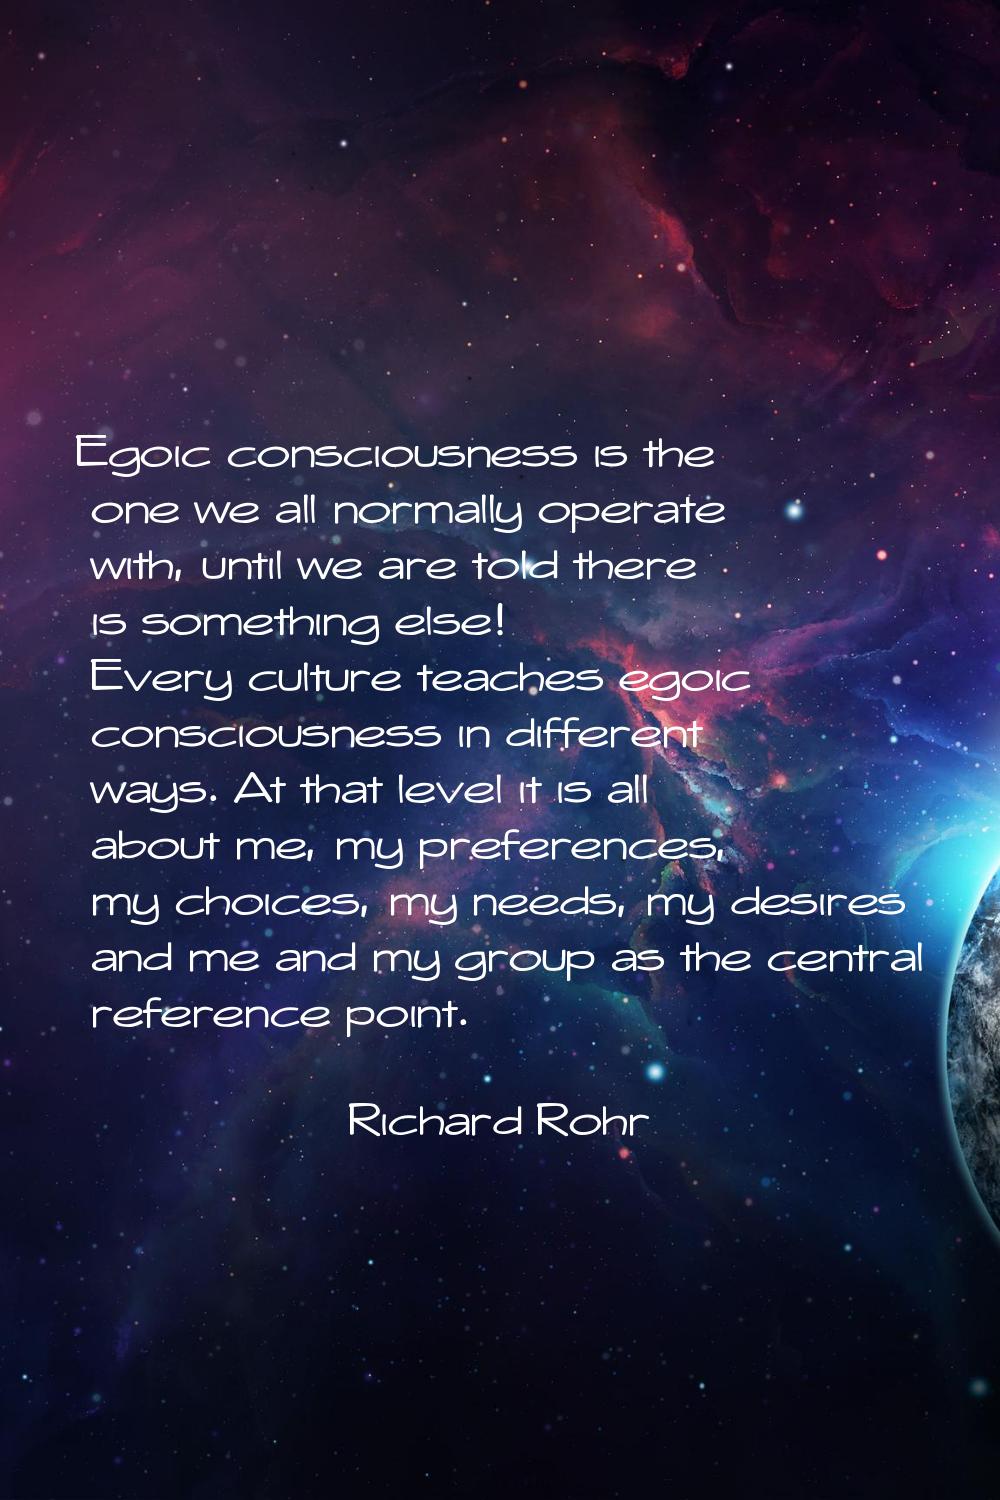 Egoic consciousness is the one we all normally operate with, until we are told there is something e